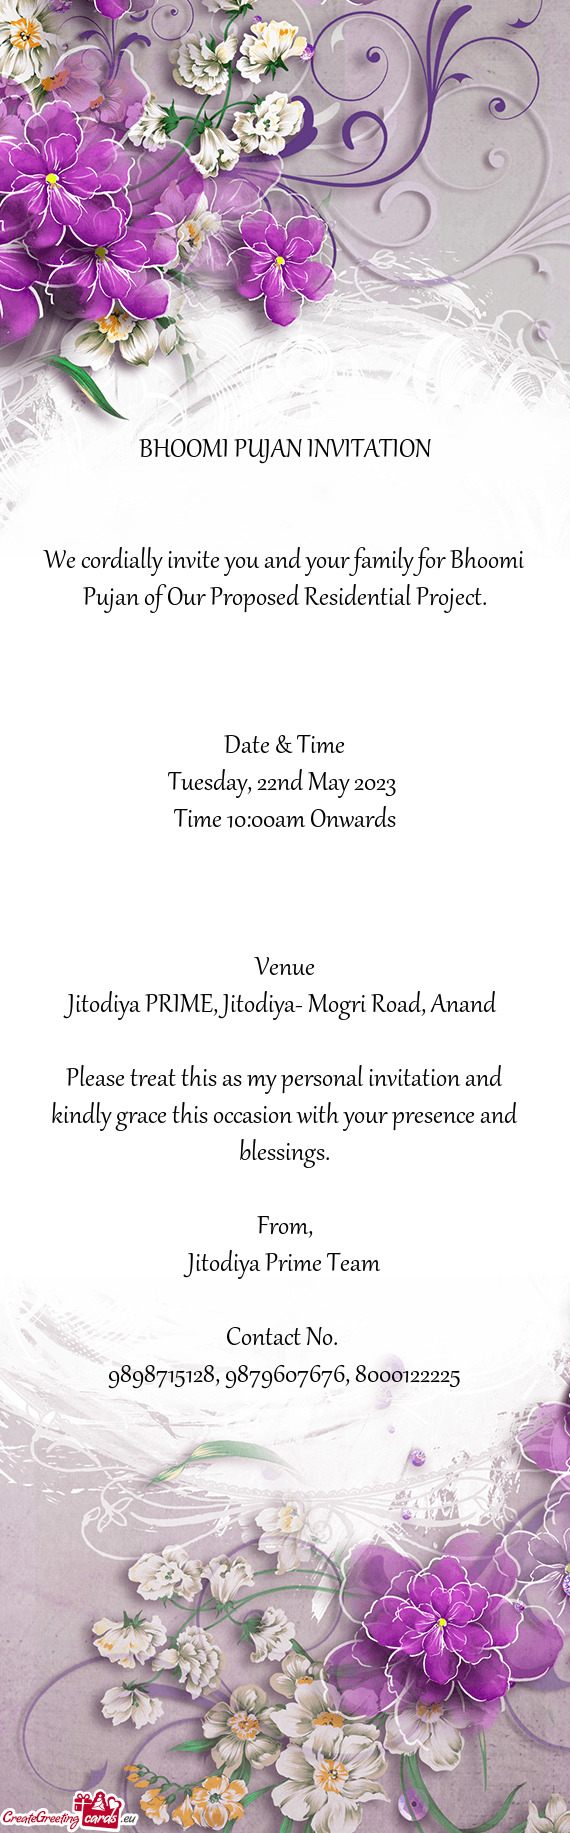 We cordially invite you and your family for Bhoomi Pujan of Our Proposed Residential Project